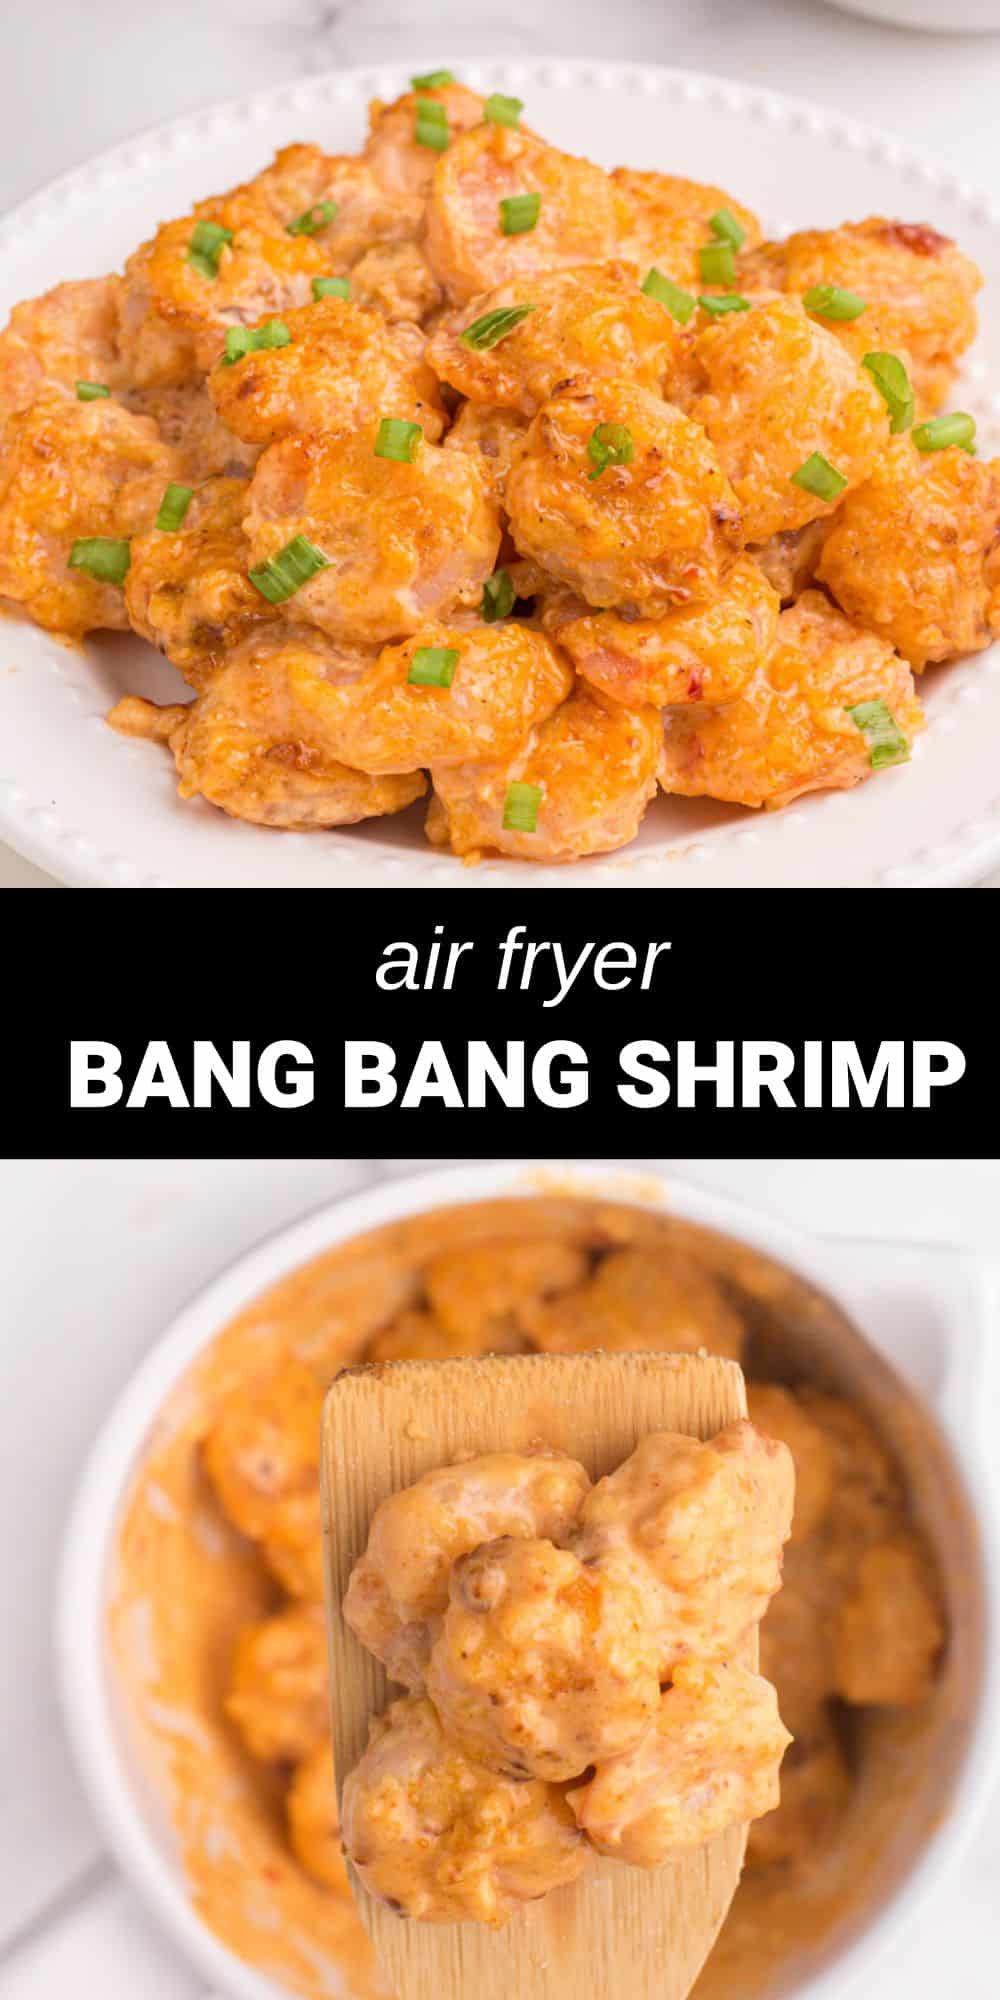 This mouthwatering Air Fryer Bang Bang Shrimp recipe will have you hooked after the very first bite. Tender, crispy air-fried shrimp, tossed in a homemade, tangy sauce makes the ultimate delicious appetizer or easy-to-make main dish. 